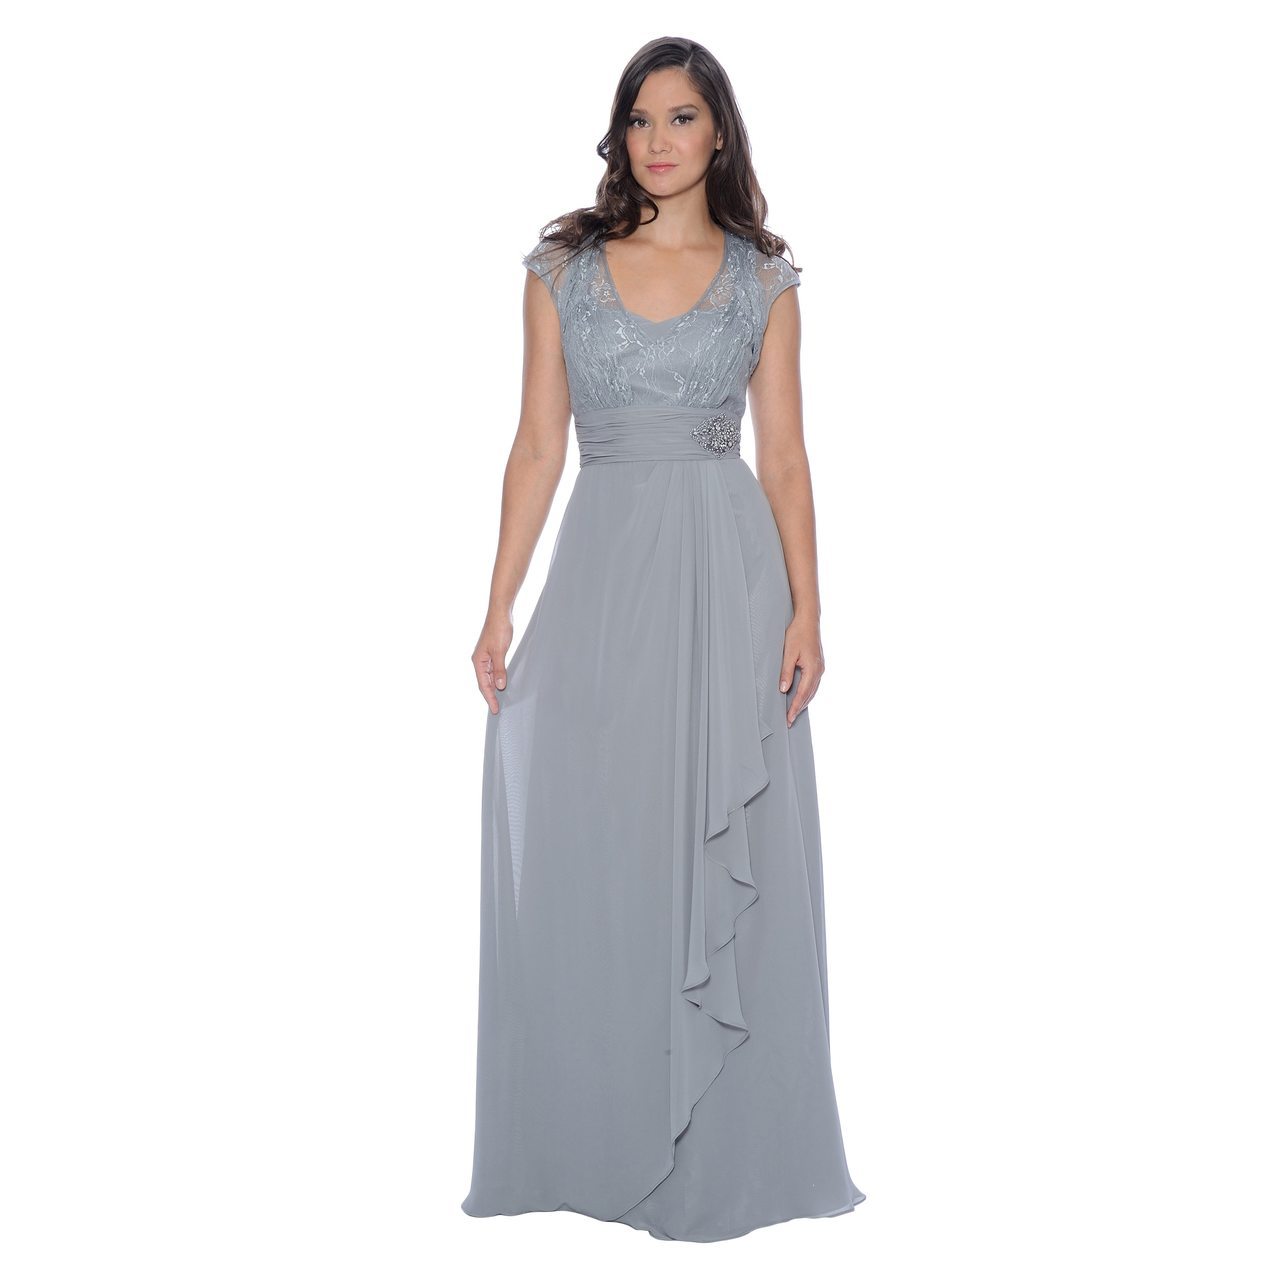 Decode 1.8 - Lace Scoop Top Chiffon Gown 182924 in Gray